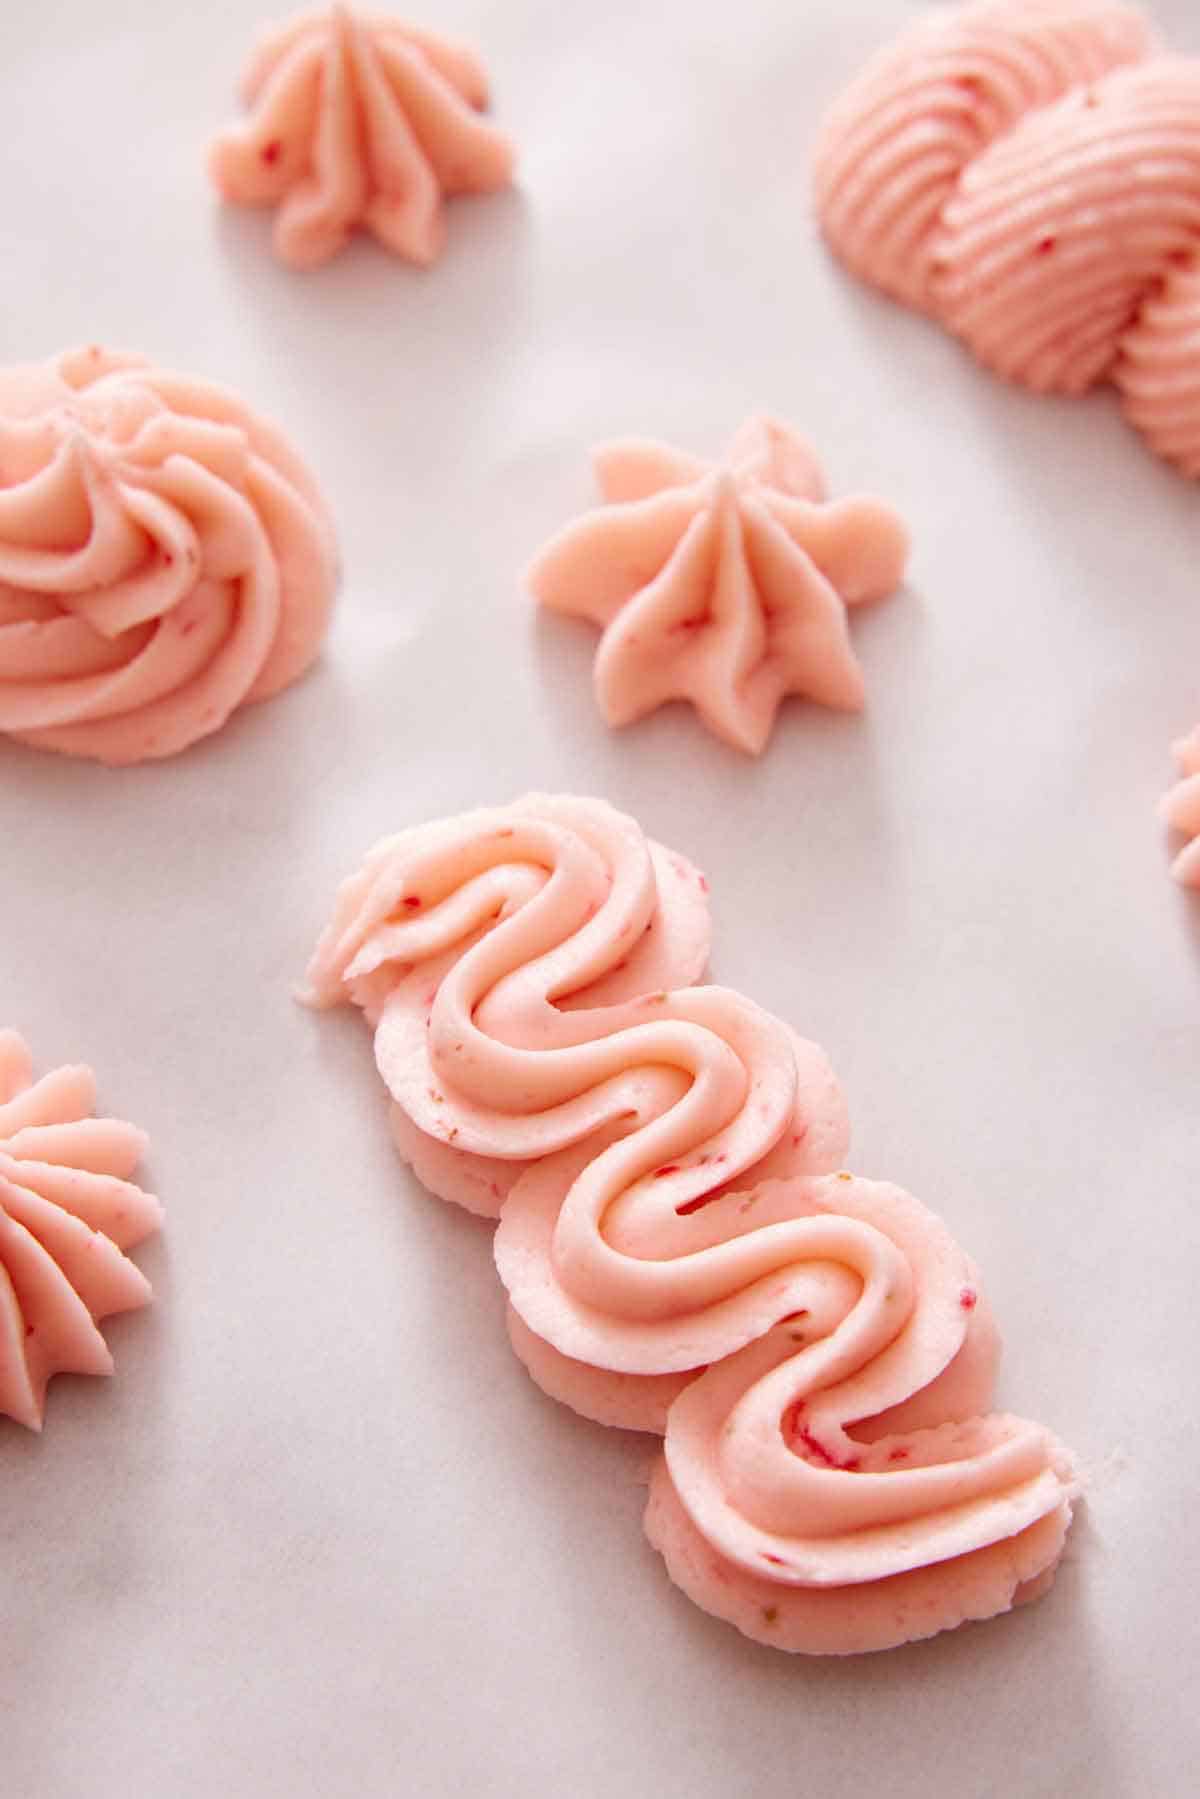 Strawberry frosting piped in different shapes on a flat surface.